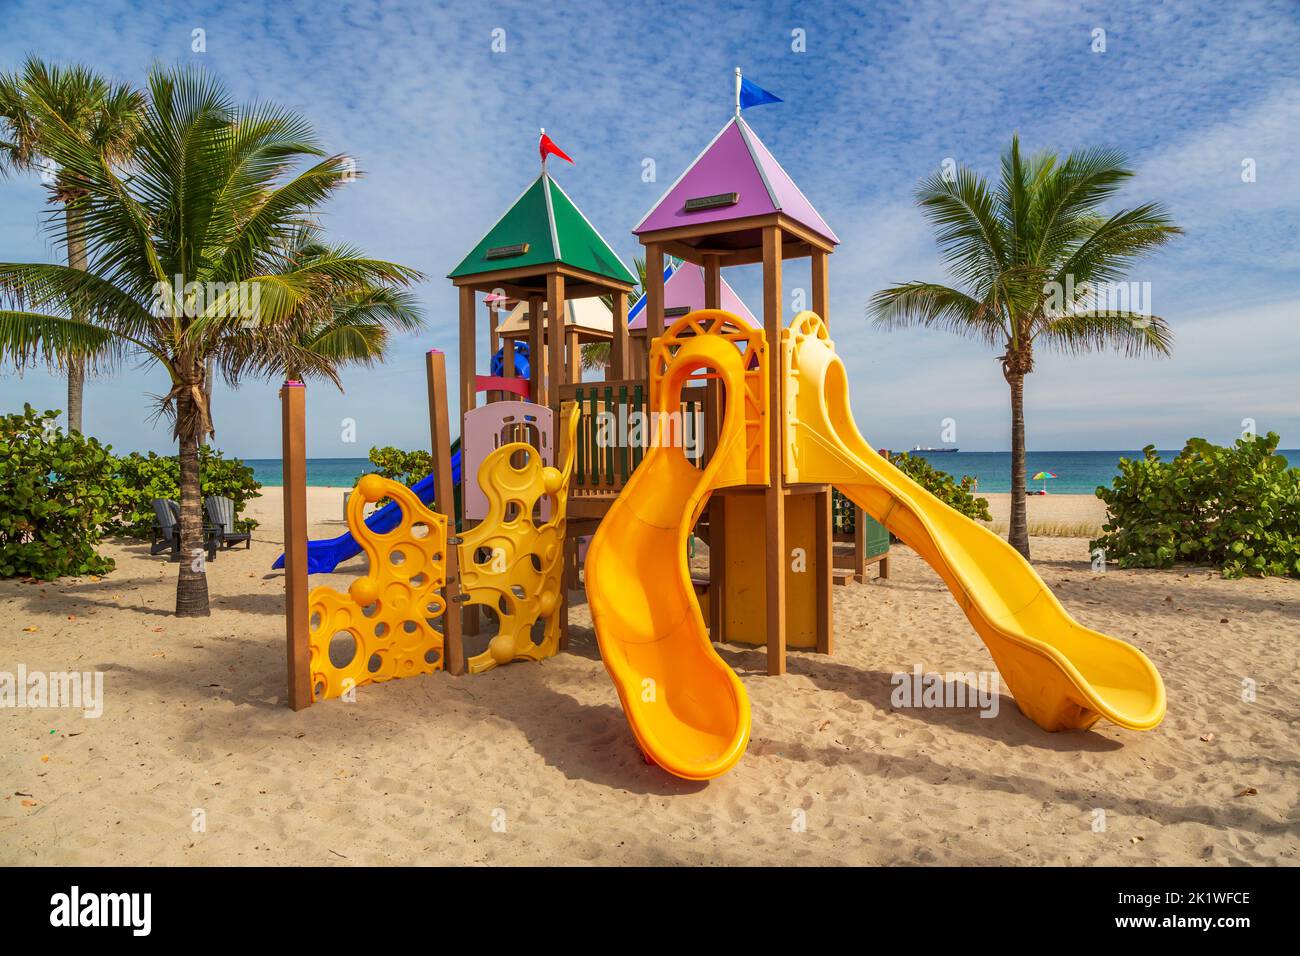 A children's play structure at Las Olas beach in Fort Lauderdale, Florida, USA. Stock Photo